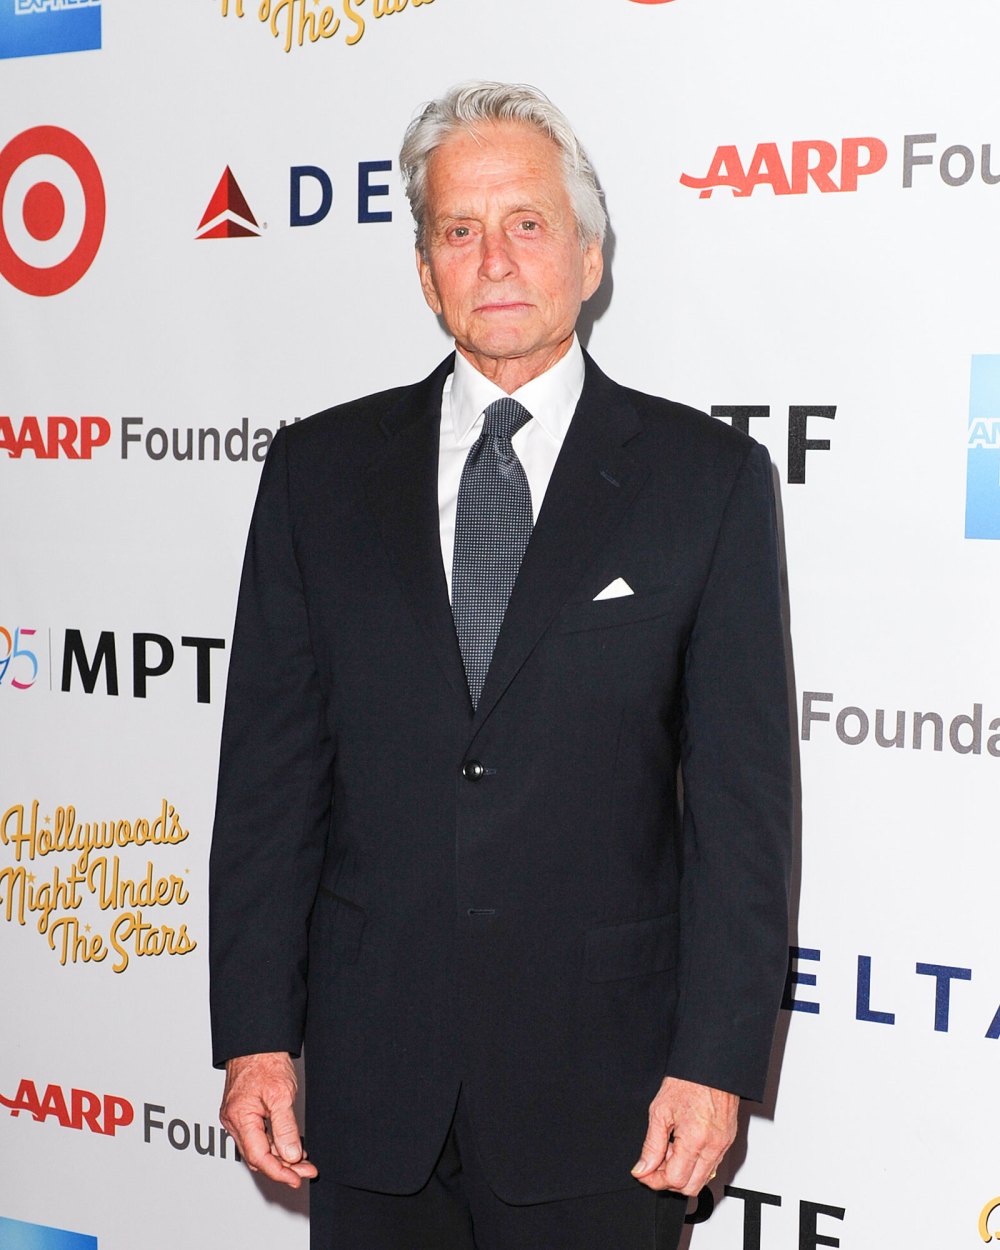 Michael Douglas Claims Val Kilmer Has Cancer, Hasn’t Spoken to Him in a Year